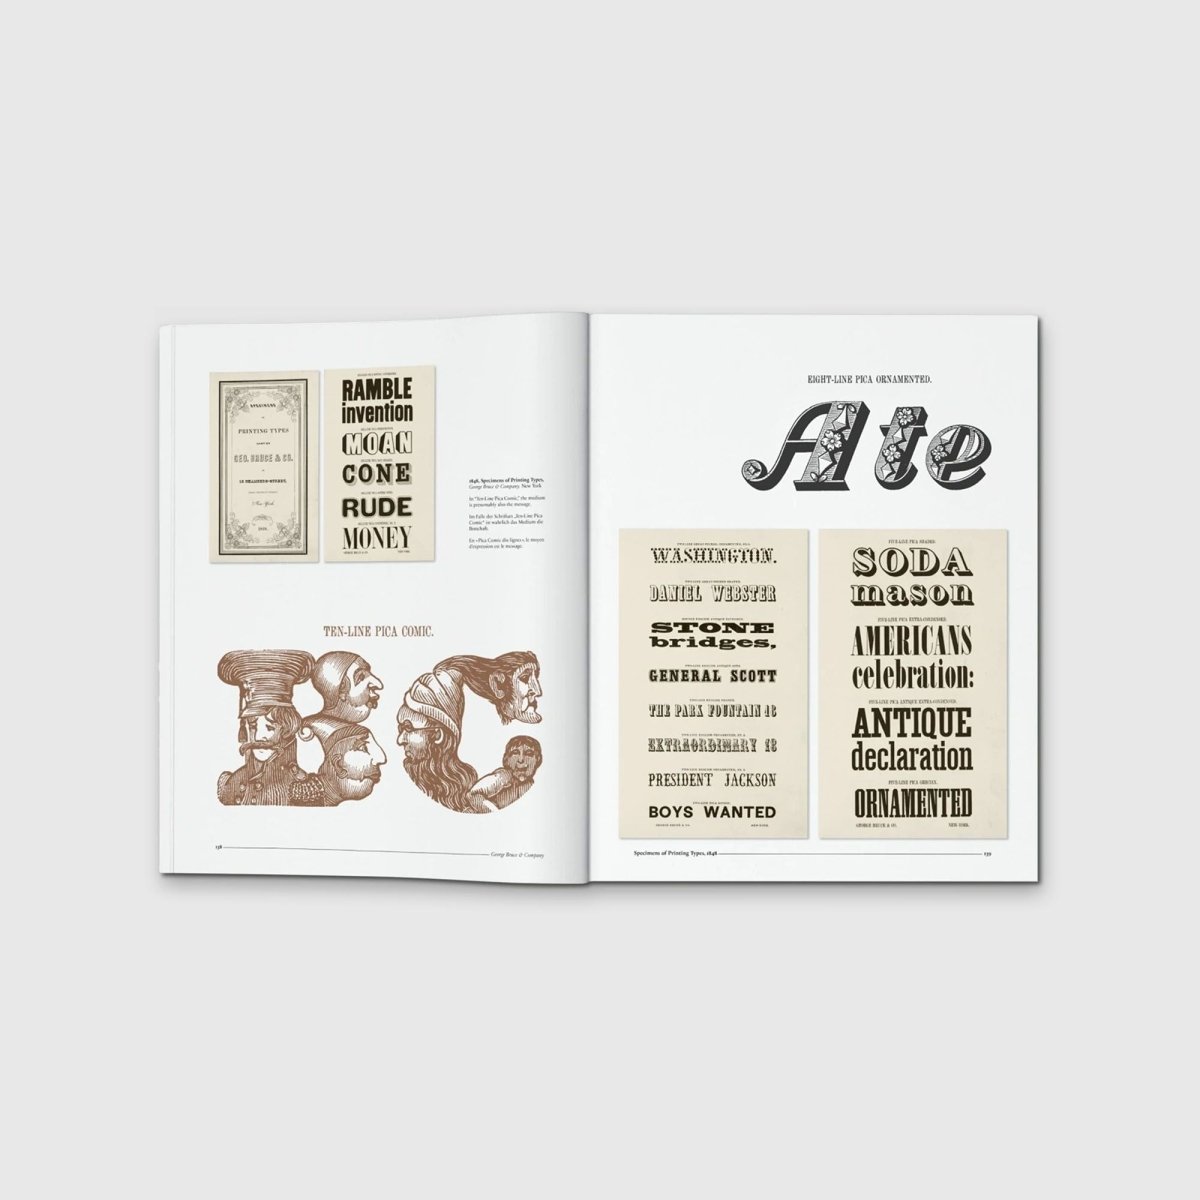 Type. A Visual History of Typefaces & Graphic Styles - Autotype